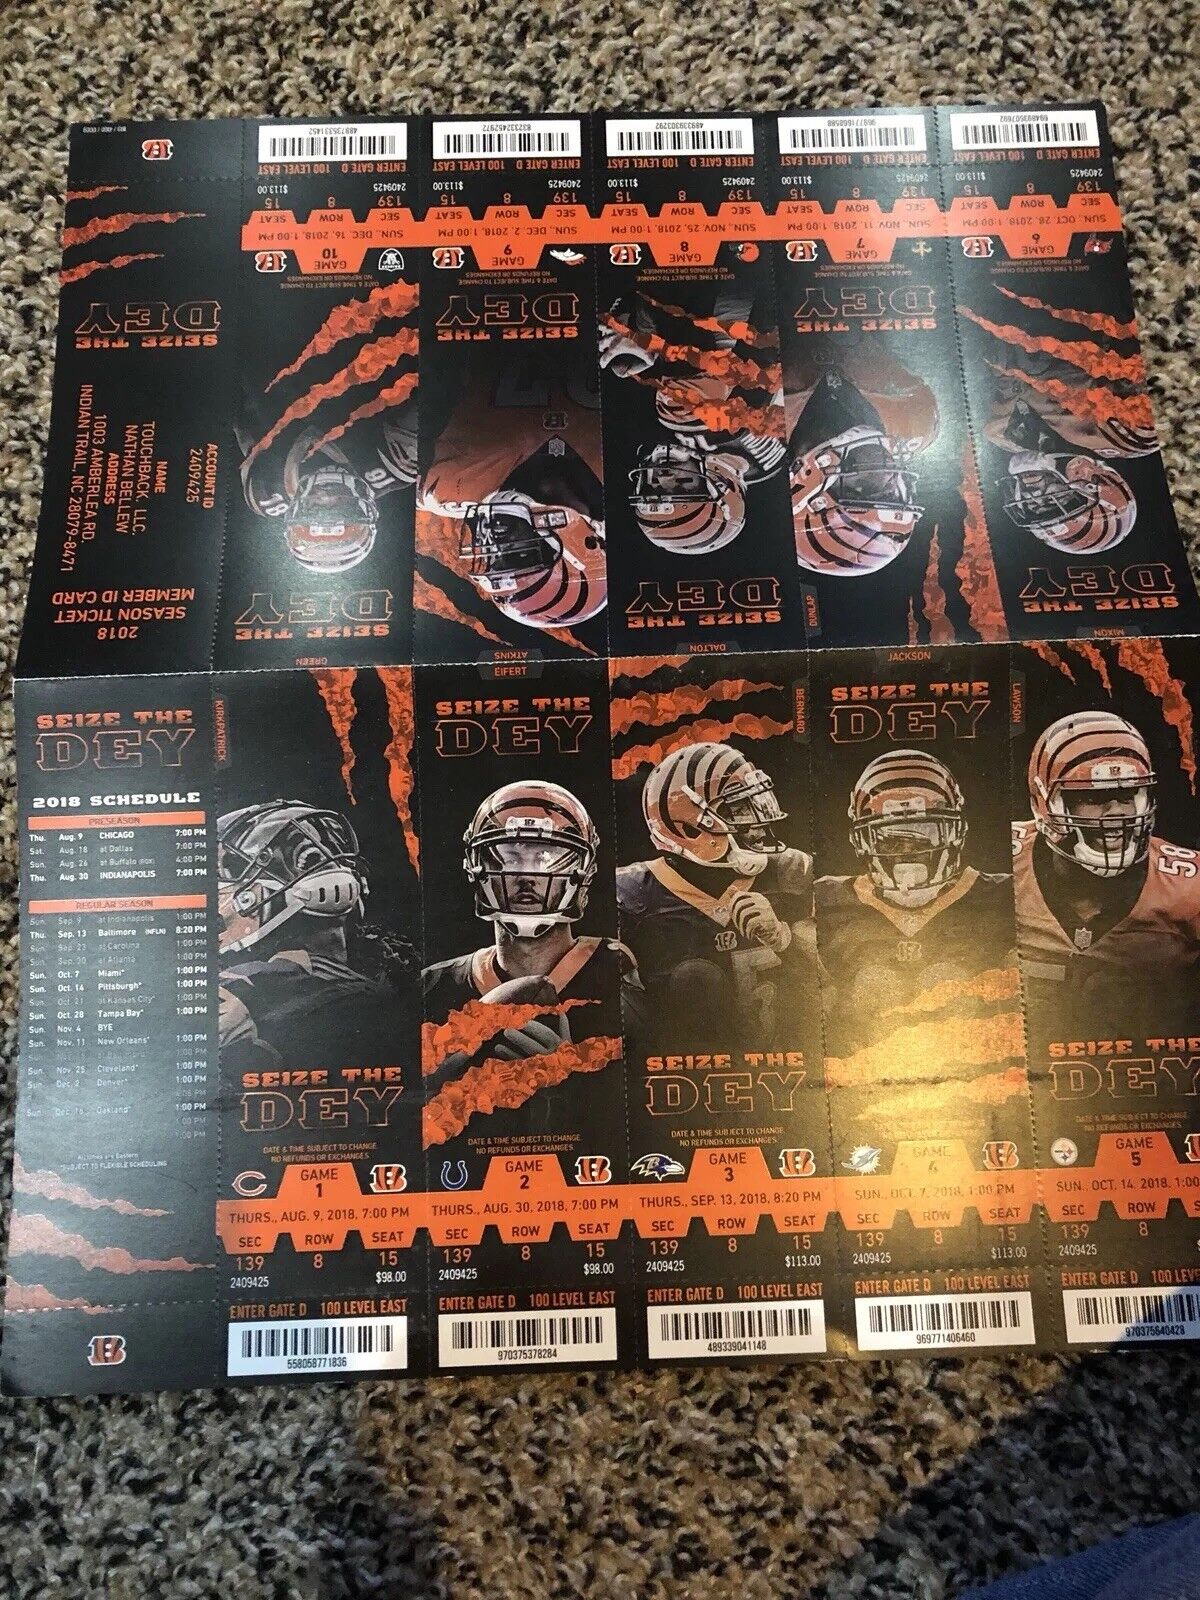 bengals tickets for saturday